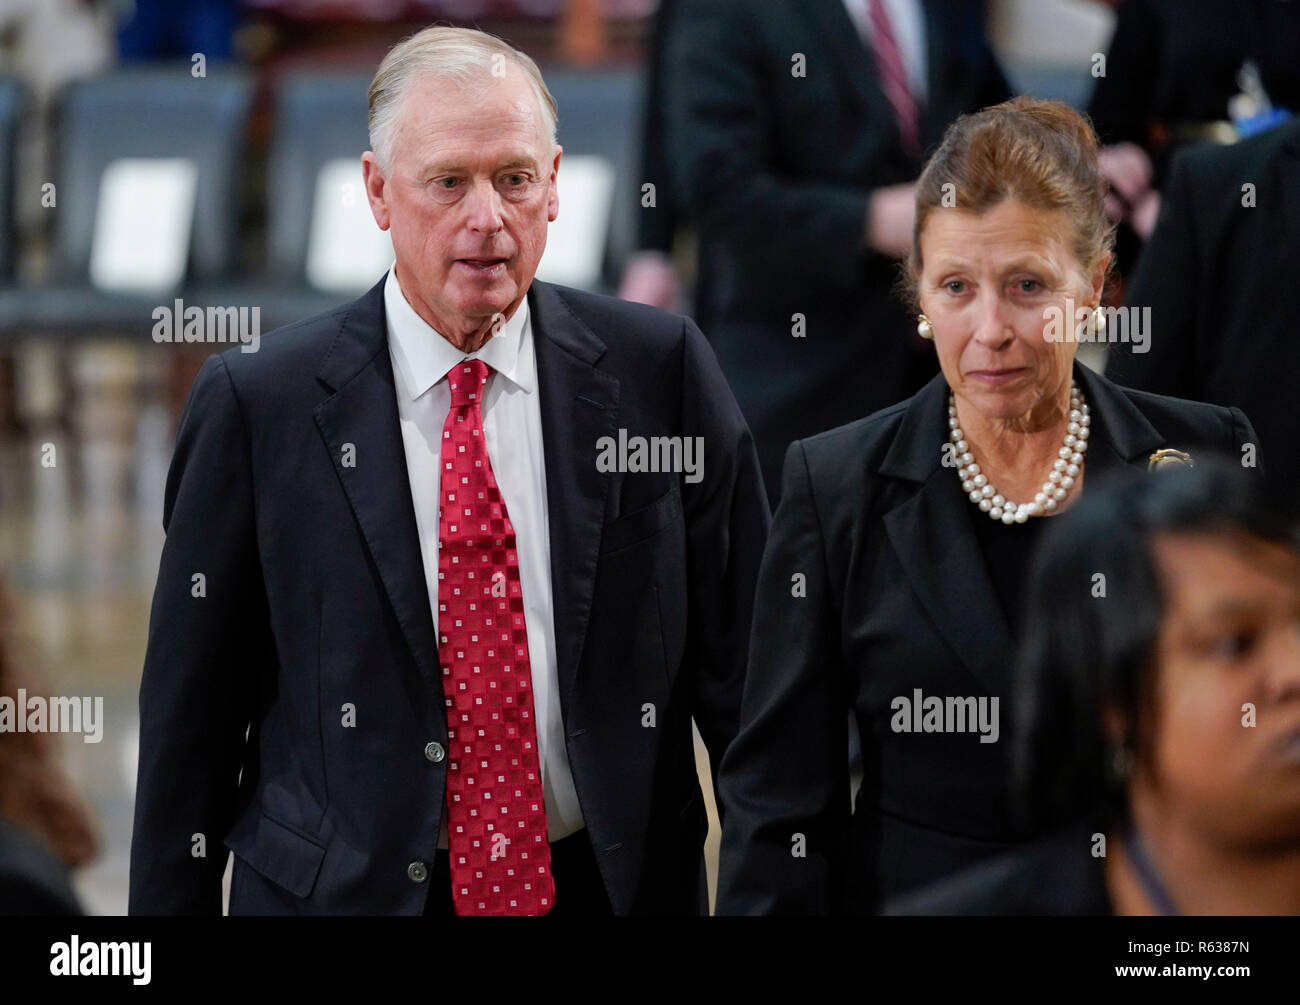 Former Vice Presidents Dan Quayle, left, and his wife Marilyn, right, arrive at the Capitol in Washington to attend services of former President George H.W. Bush, Monday, Dec. 3, 2018. (AP Photo/Pablo Martinez Monsivais/Pool) | usage worldwide Stock Photo